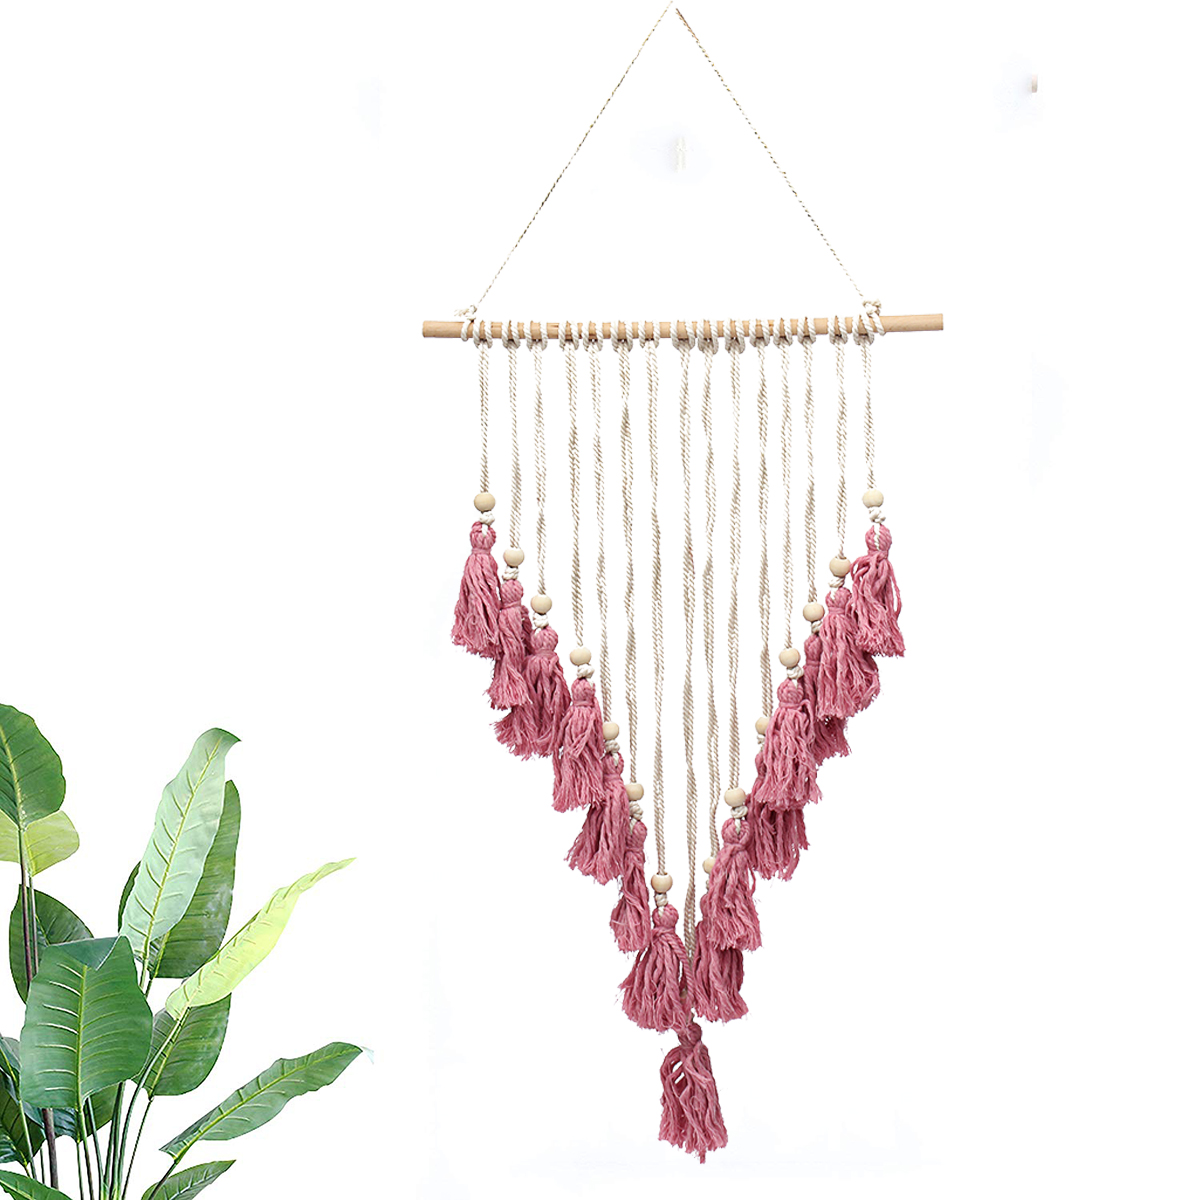 

Wall Hanging Handwoven Bohemian Cotton Rope Chic Tapestry Home Door Decorations